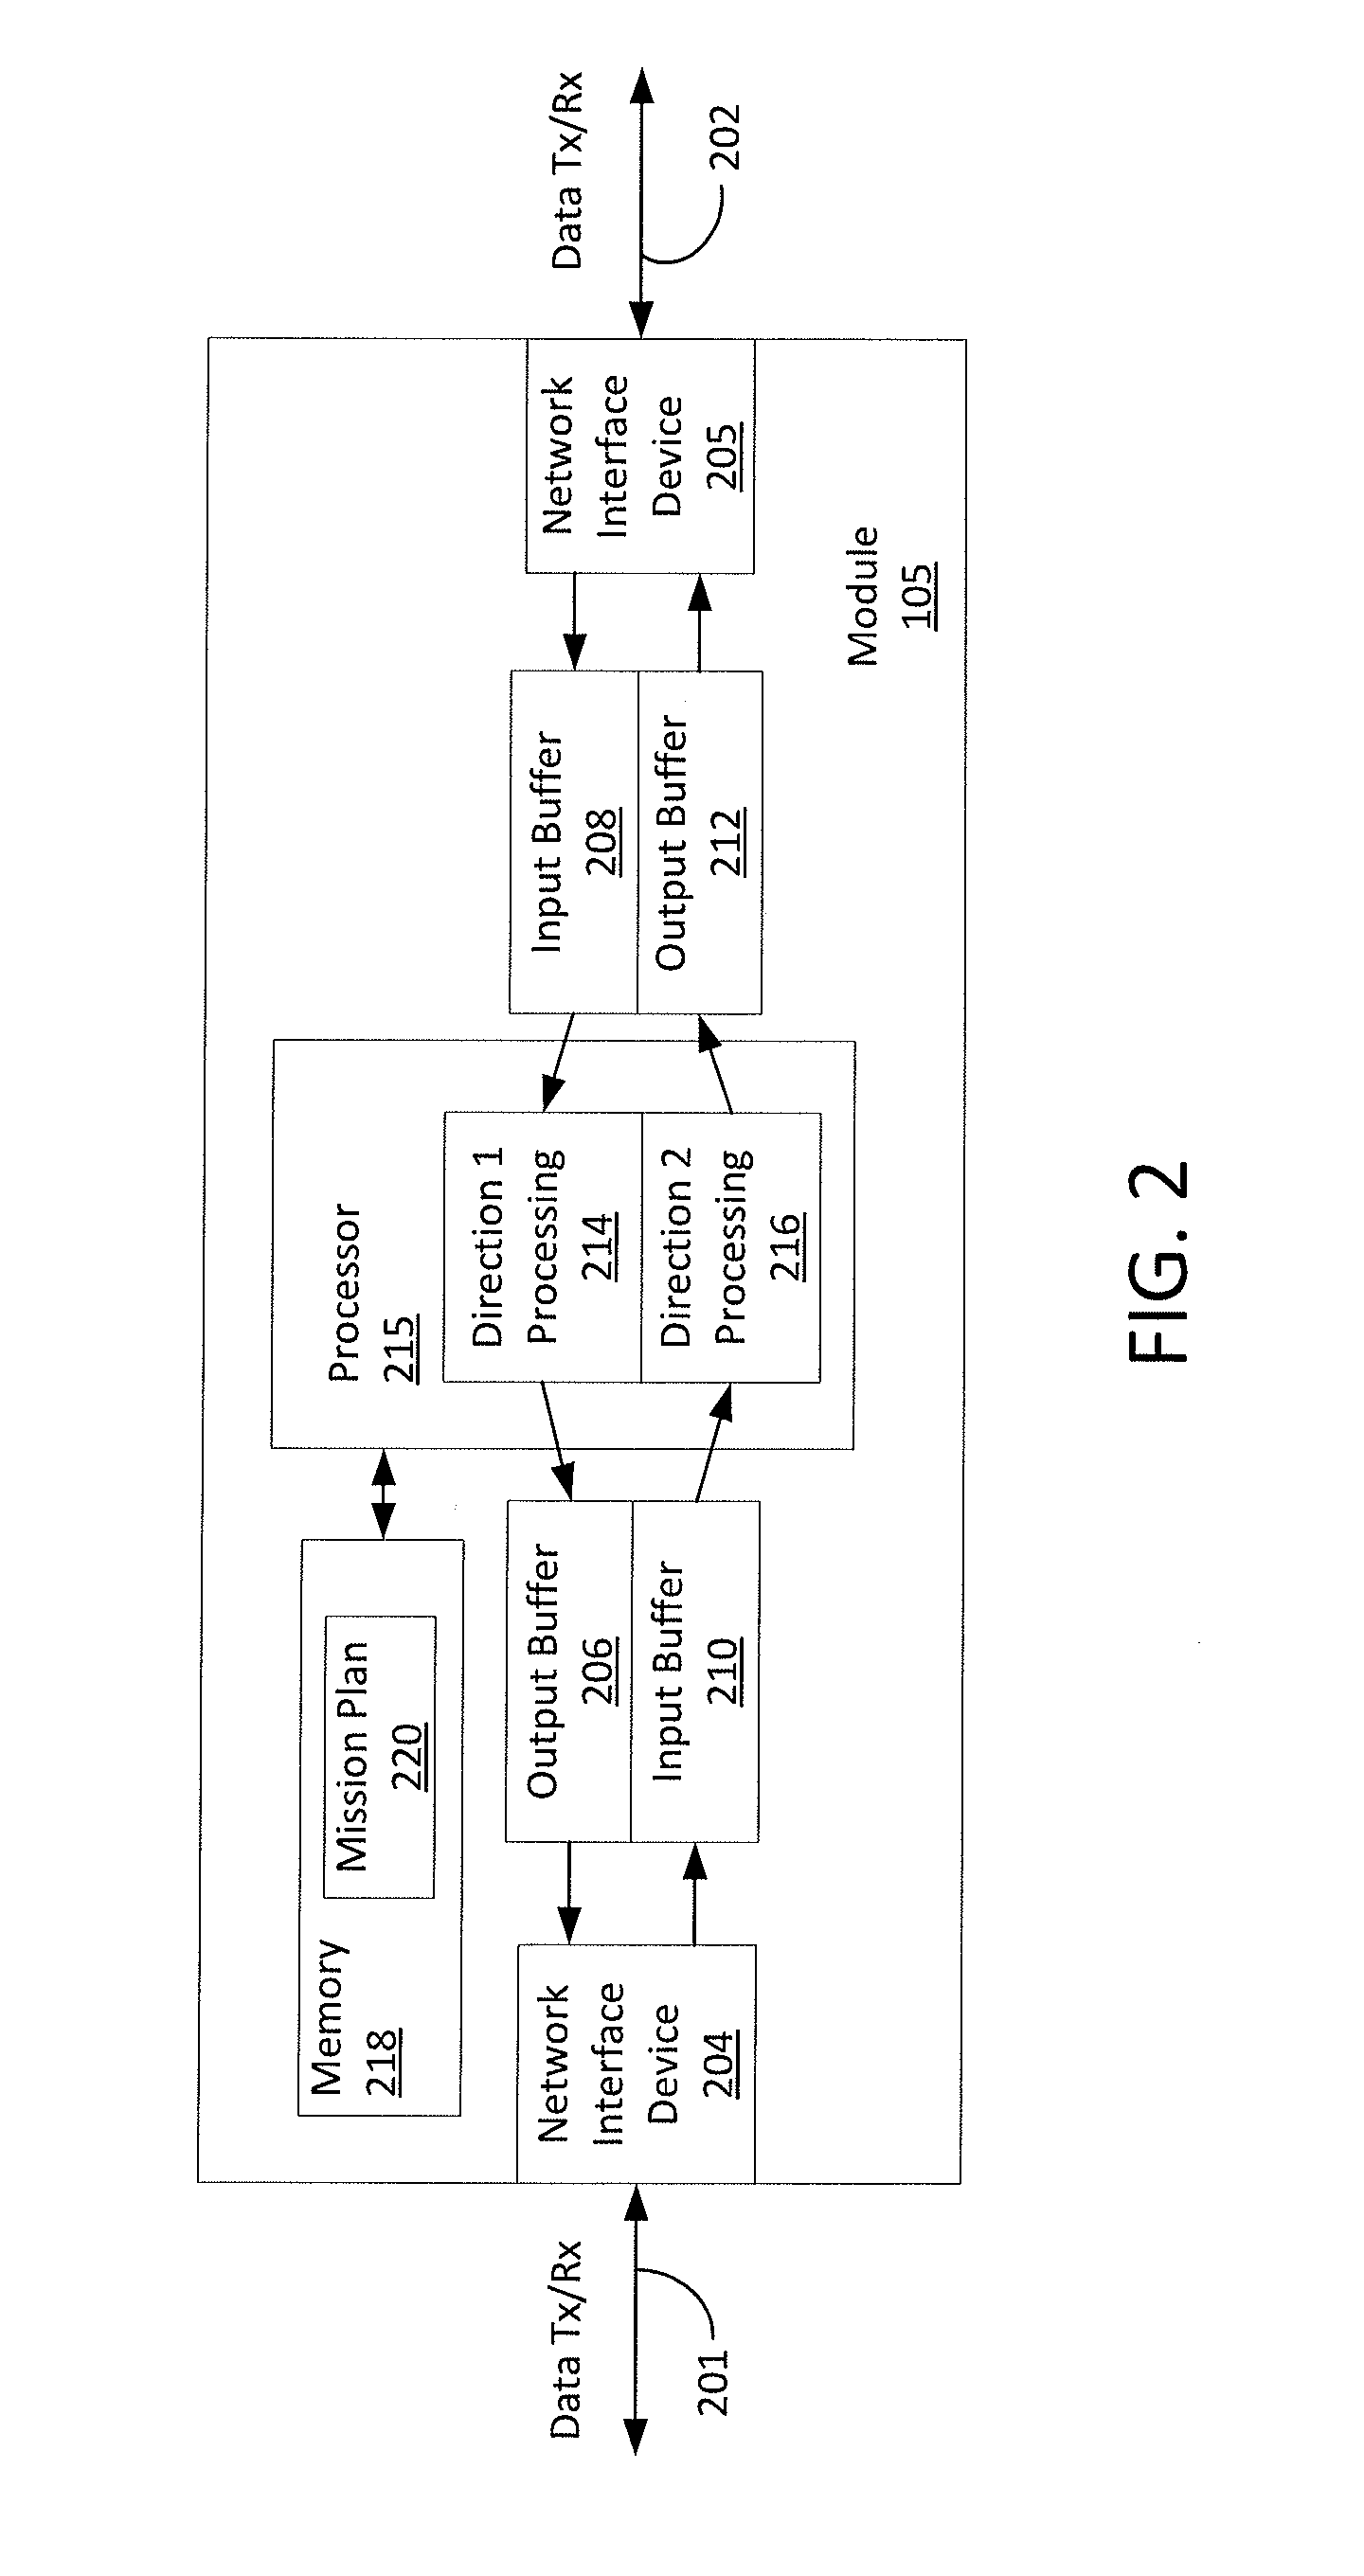 Firewalls for filtering communications in a dynamic computer network